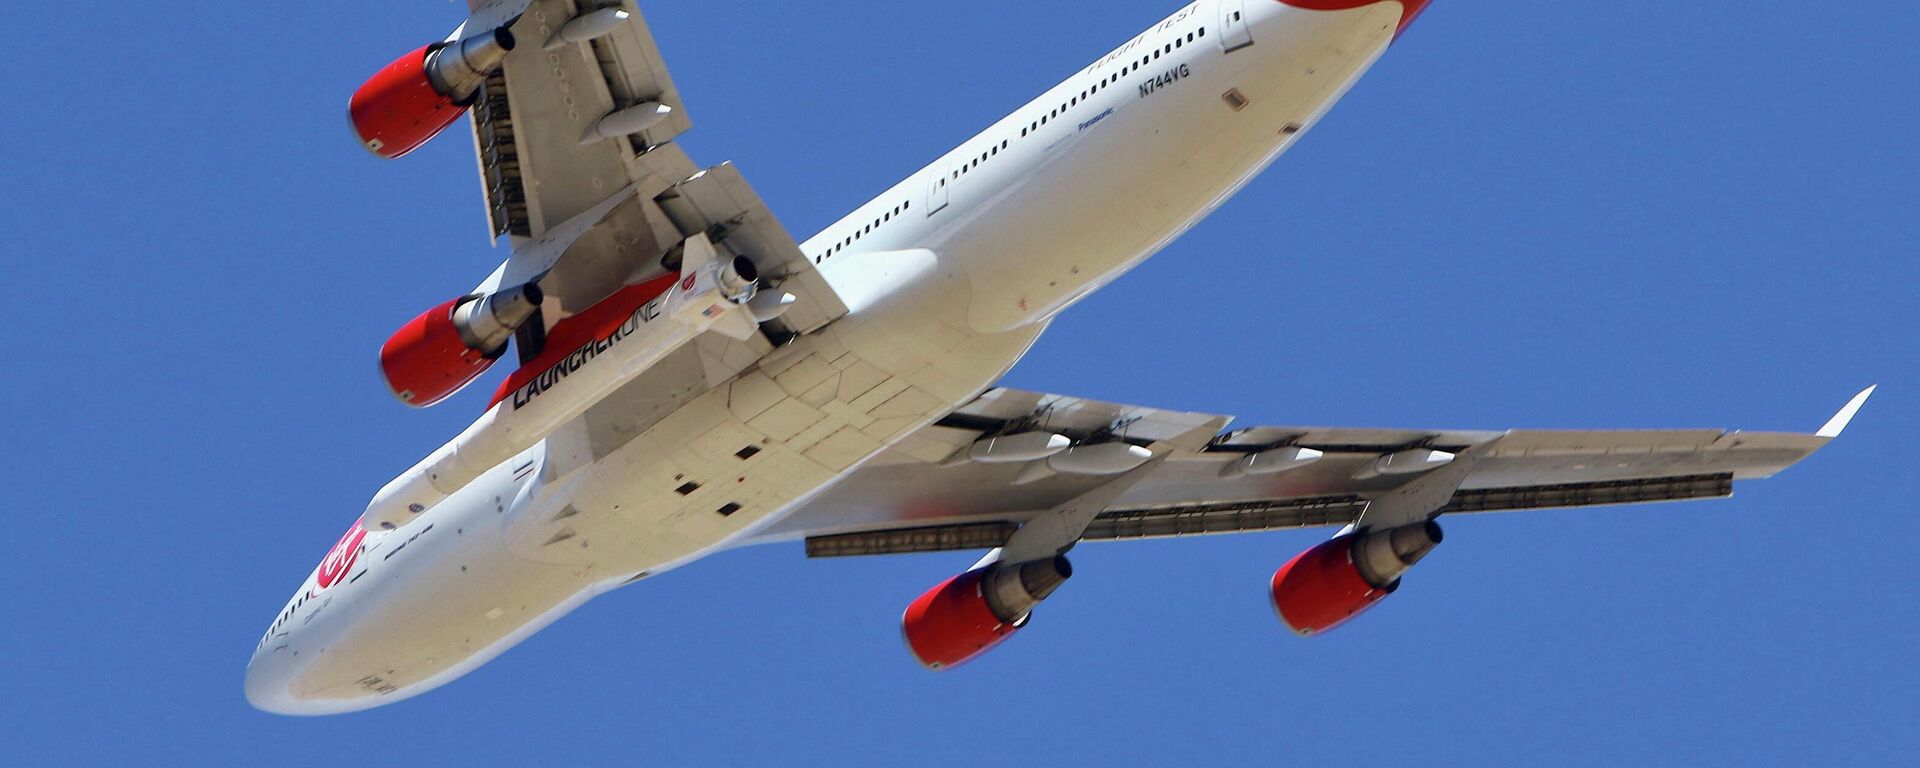 In this Jan. 17, 2021, file photo, Virgin Orbit Boeing 747-400 rocket launch platform takes off from Mojave Air and Space Port, Mojave (MHV) on its second orbital launch demonstration of LauncherOne rocket in the Mojave Desert, north of Los Angeles.  - Sputnik International, 1920, 09.01.2023